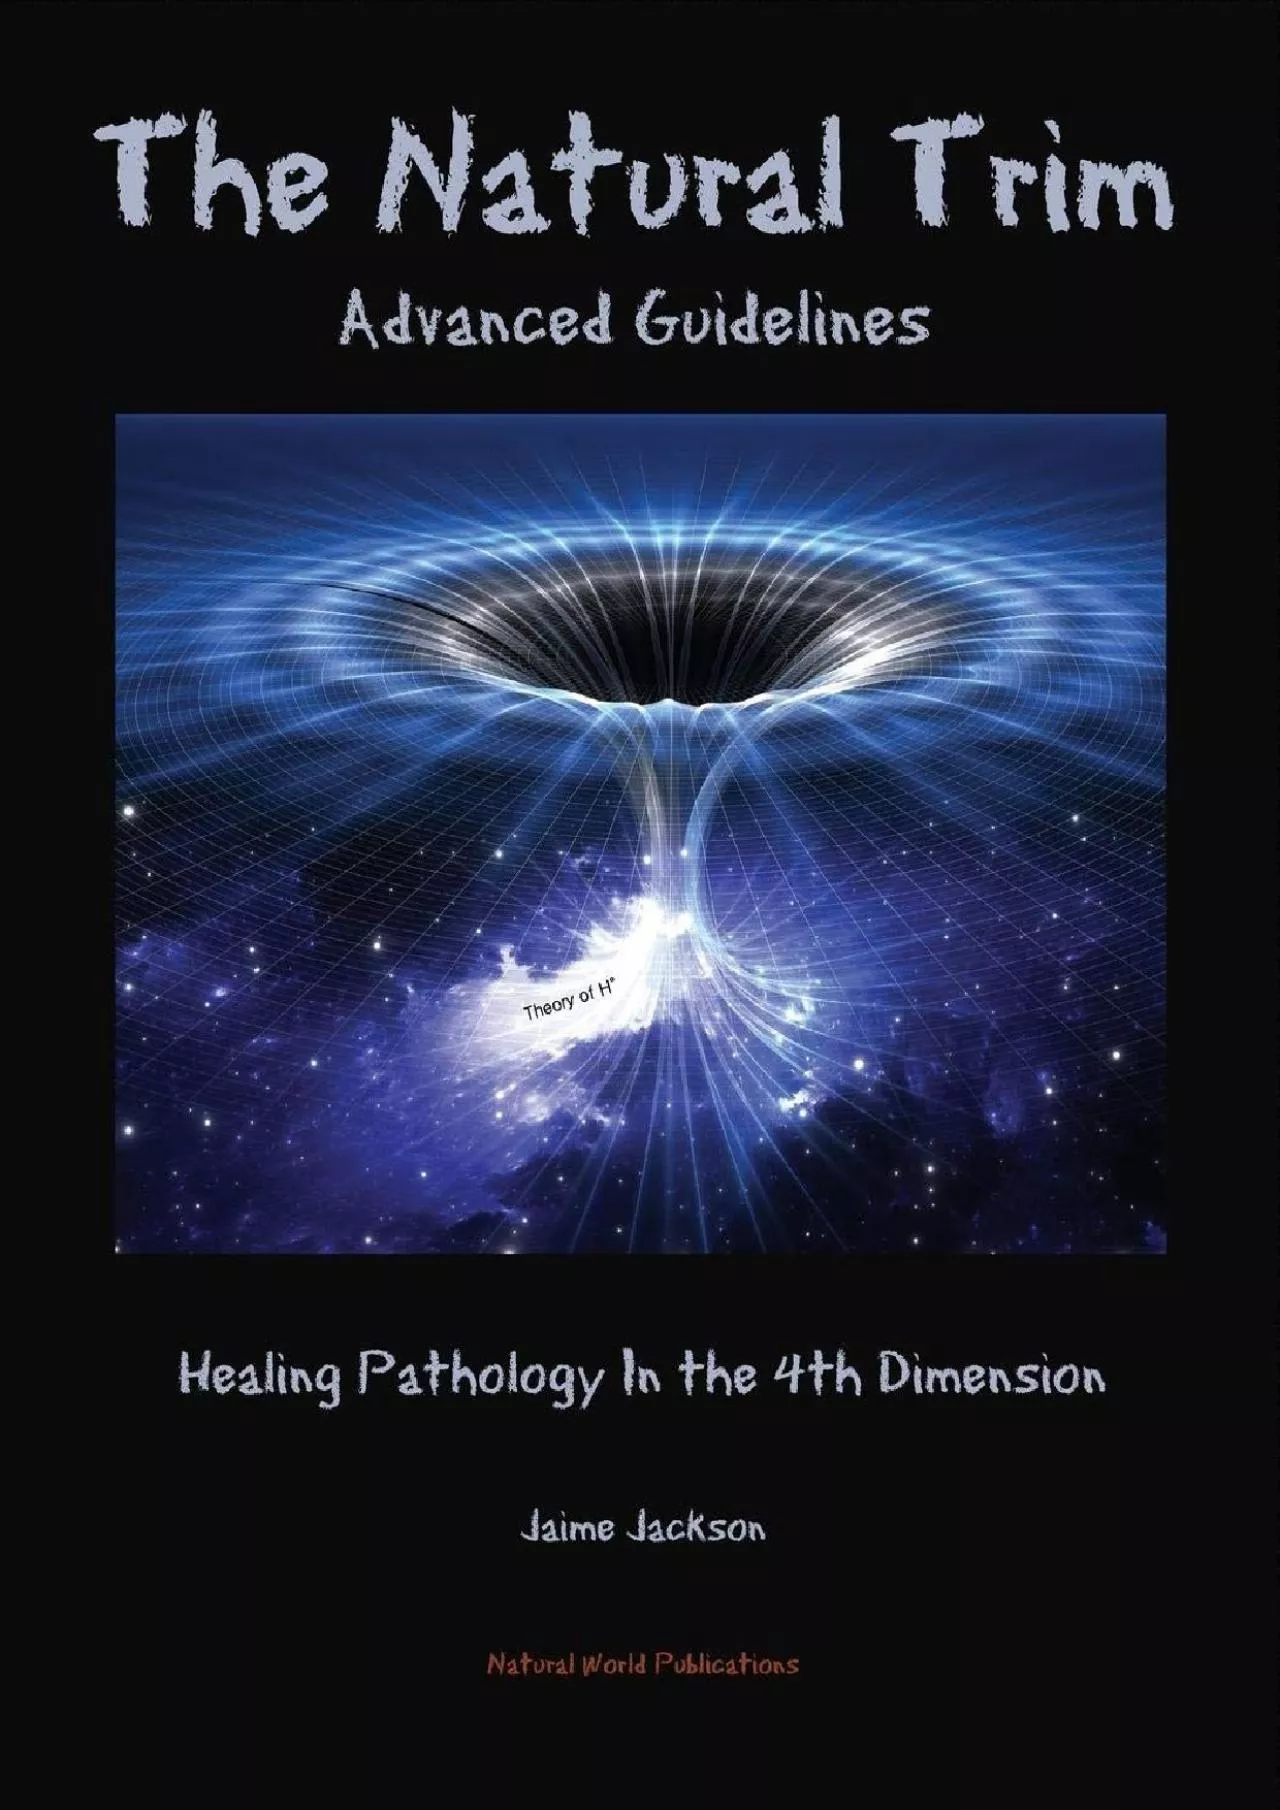 [EBOOK] The Natural Trim: Advanced Guidelines: Healing Pathology in the 4th Dimension